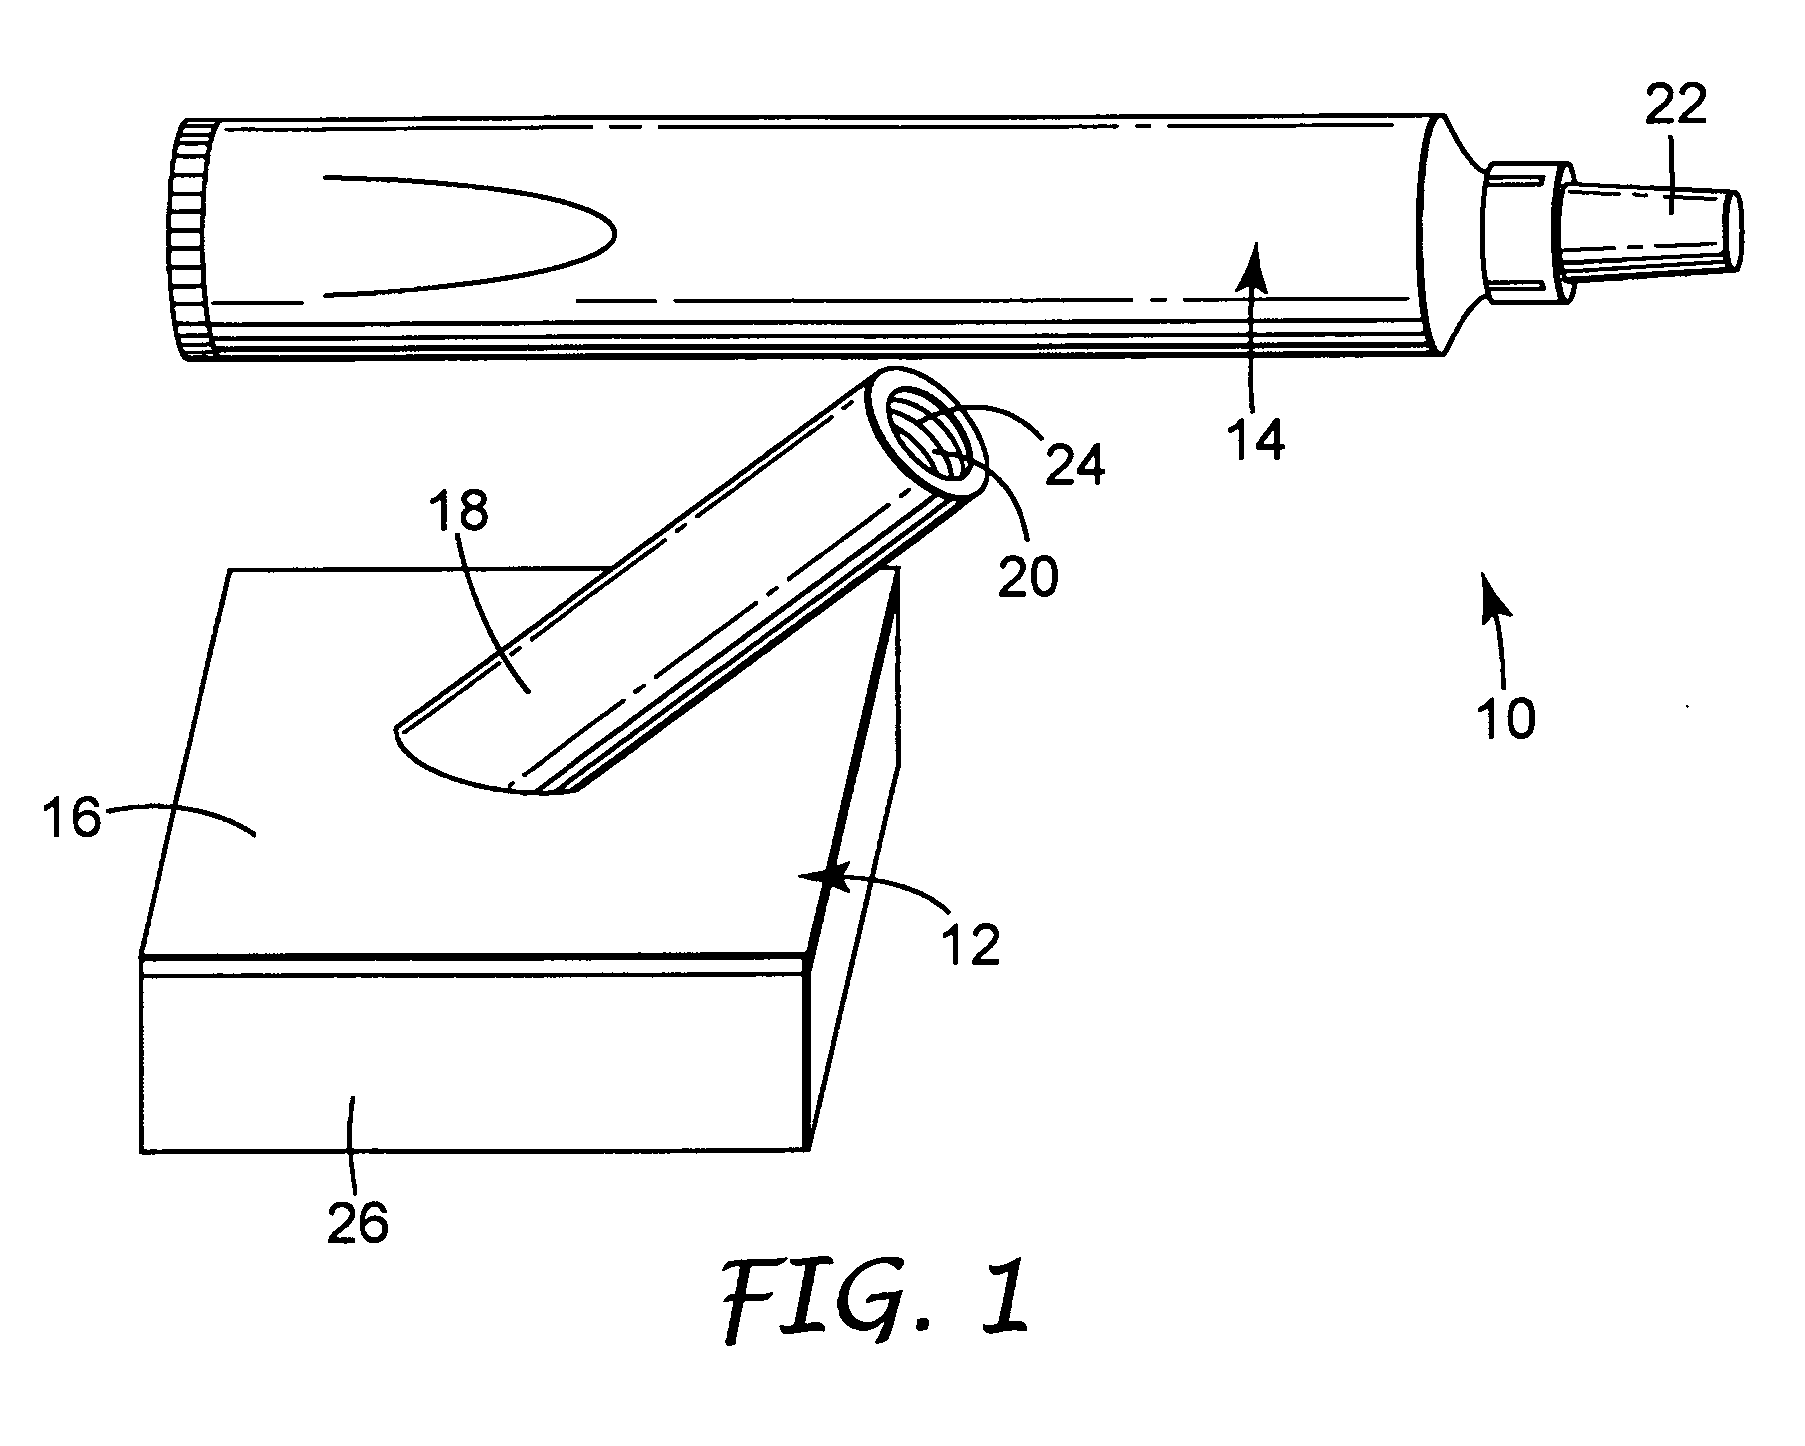 Surgical prep solution applicator system and methods